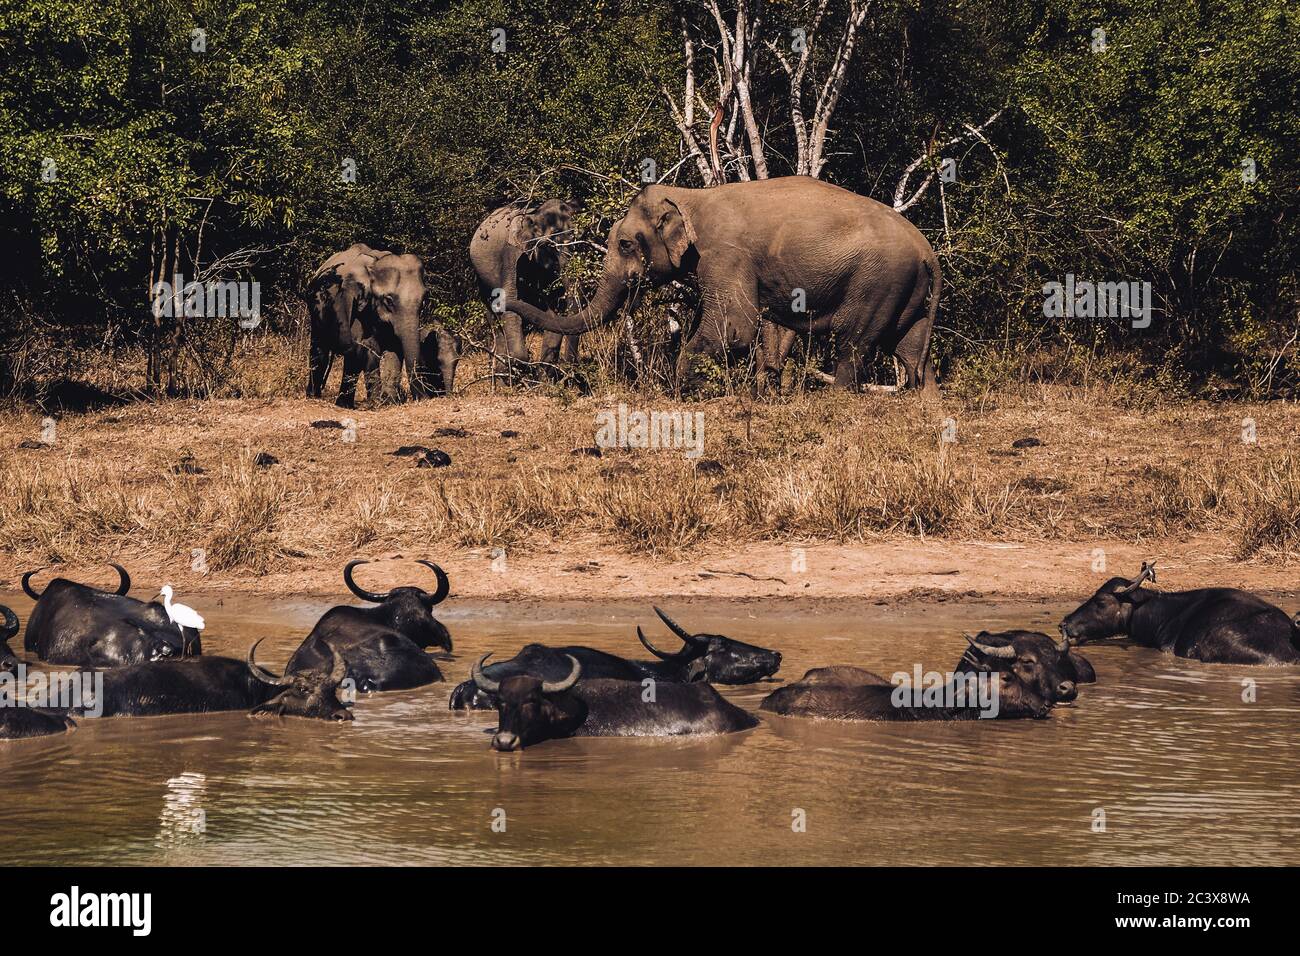 Elephant family in the Udawalawe National Park Sri Lanka. Wildlife observation from safari jeep. A herd of water buffaloes bathing in foreground. Stock Photo